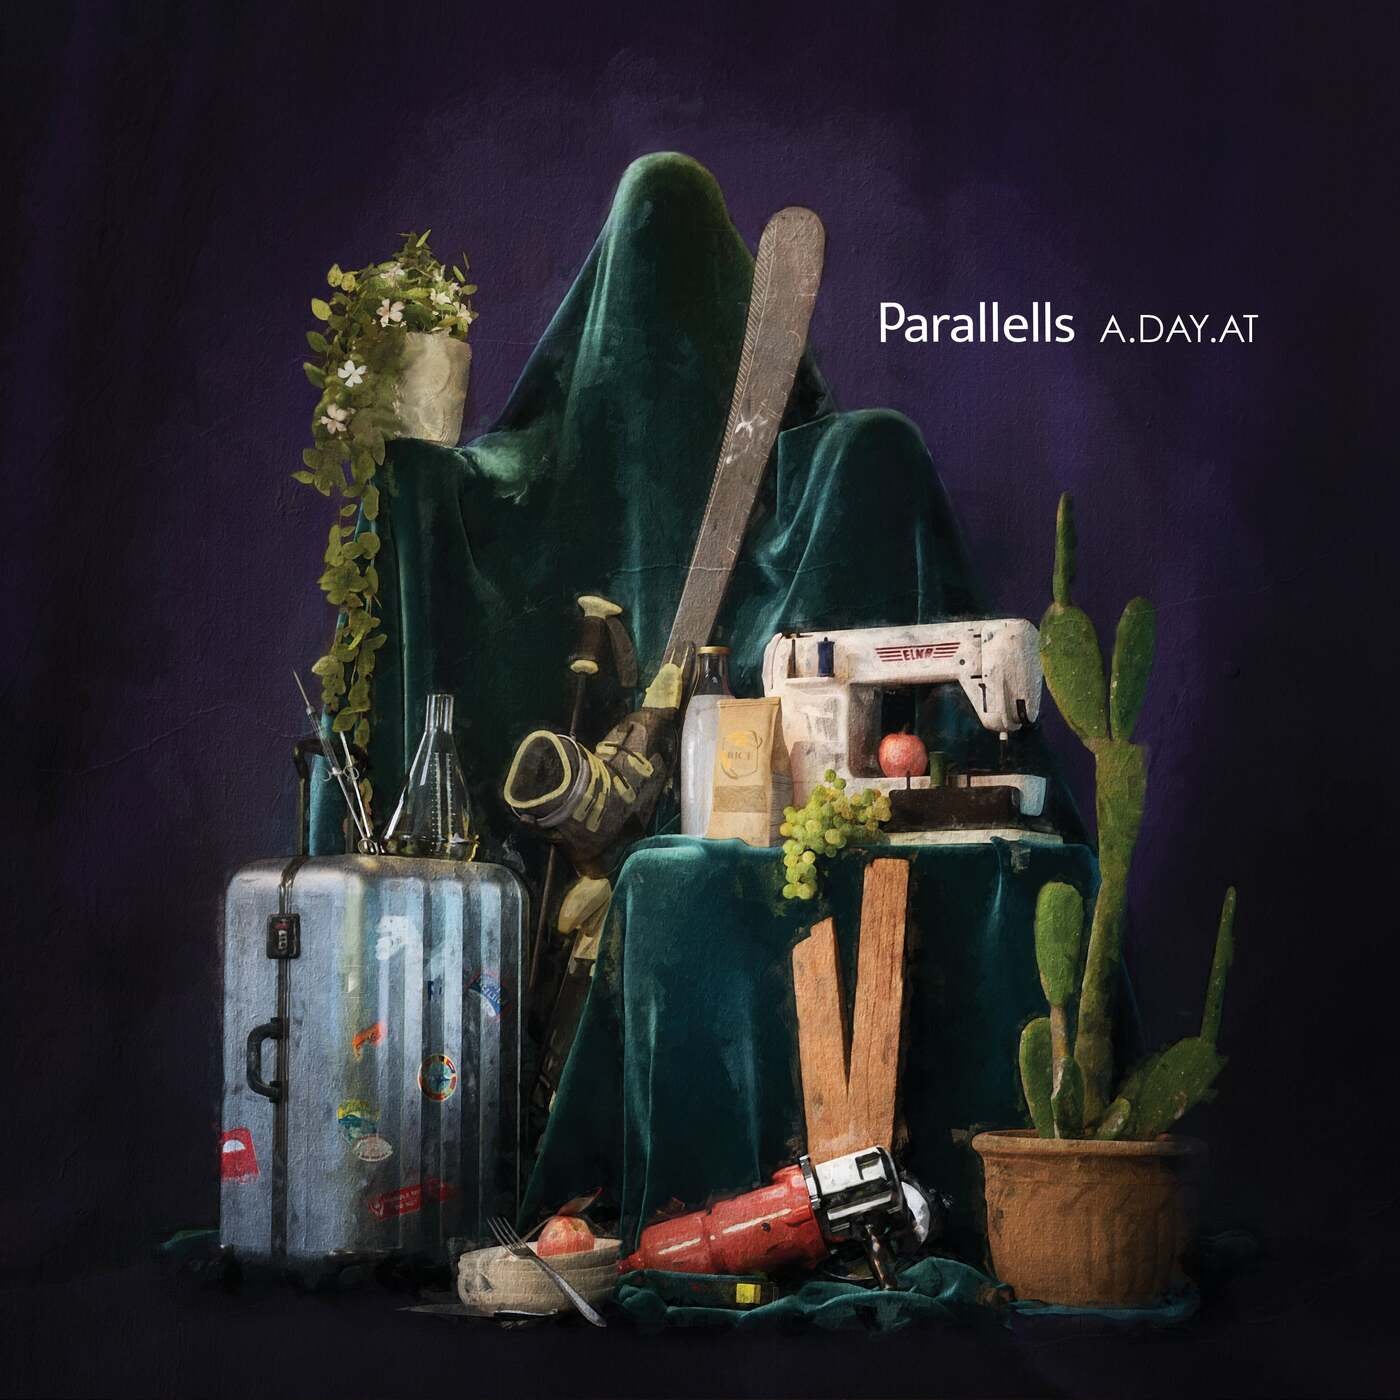 Parallells - A Day at [AWD532848]